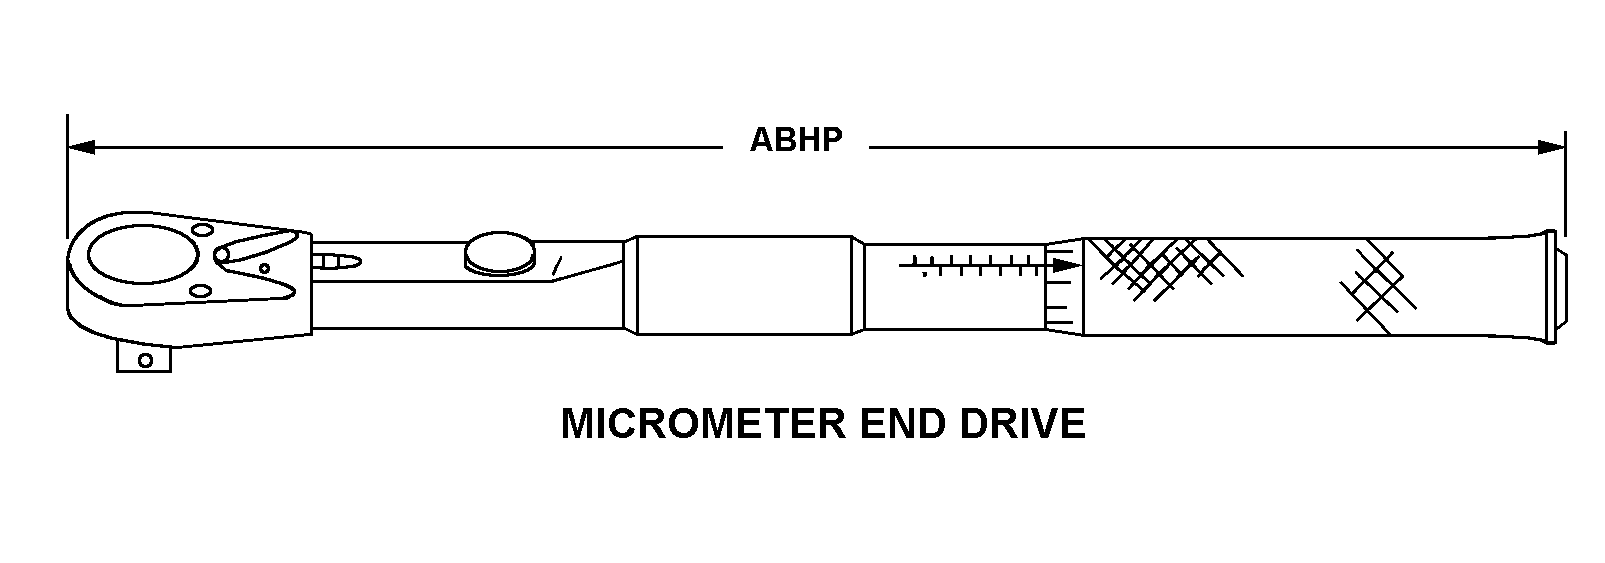 MICROMETER END DRIVE style nsn 5120-00-902-3549